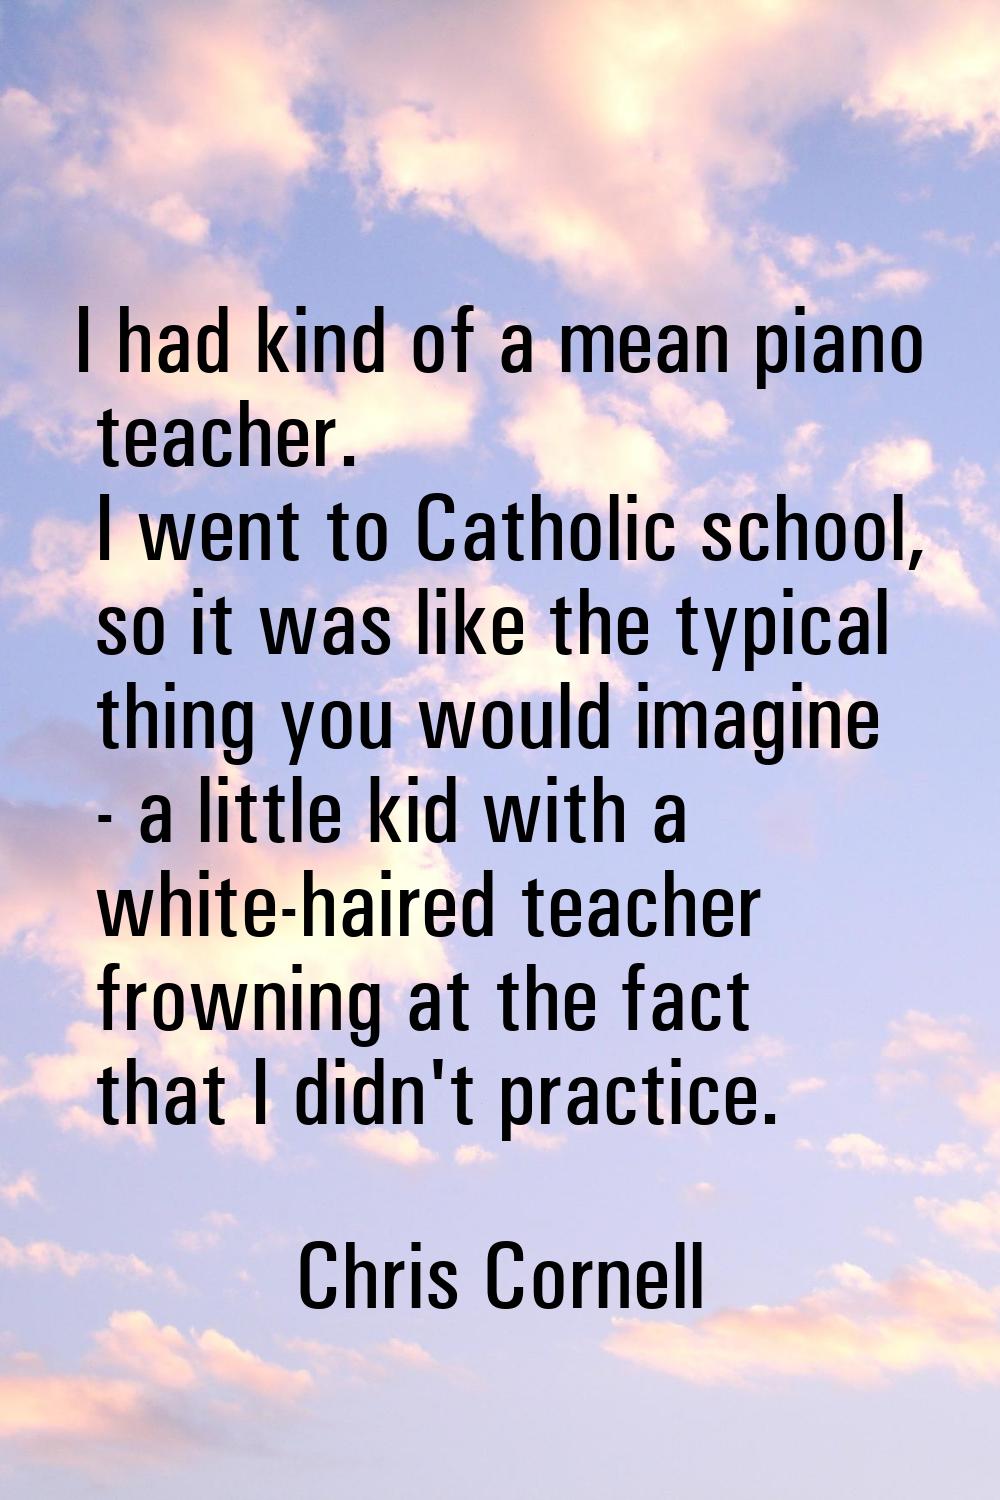 I had kind of a mean piano teacher. I went to Catholic school, so it was like the typical thing you